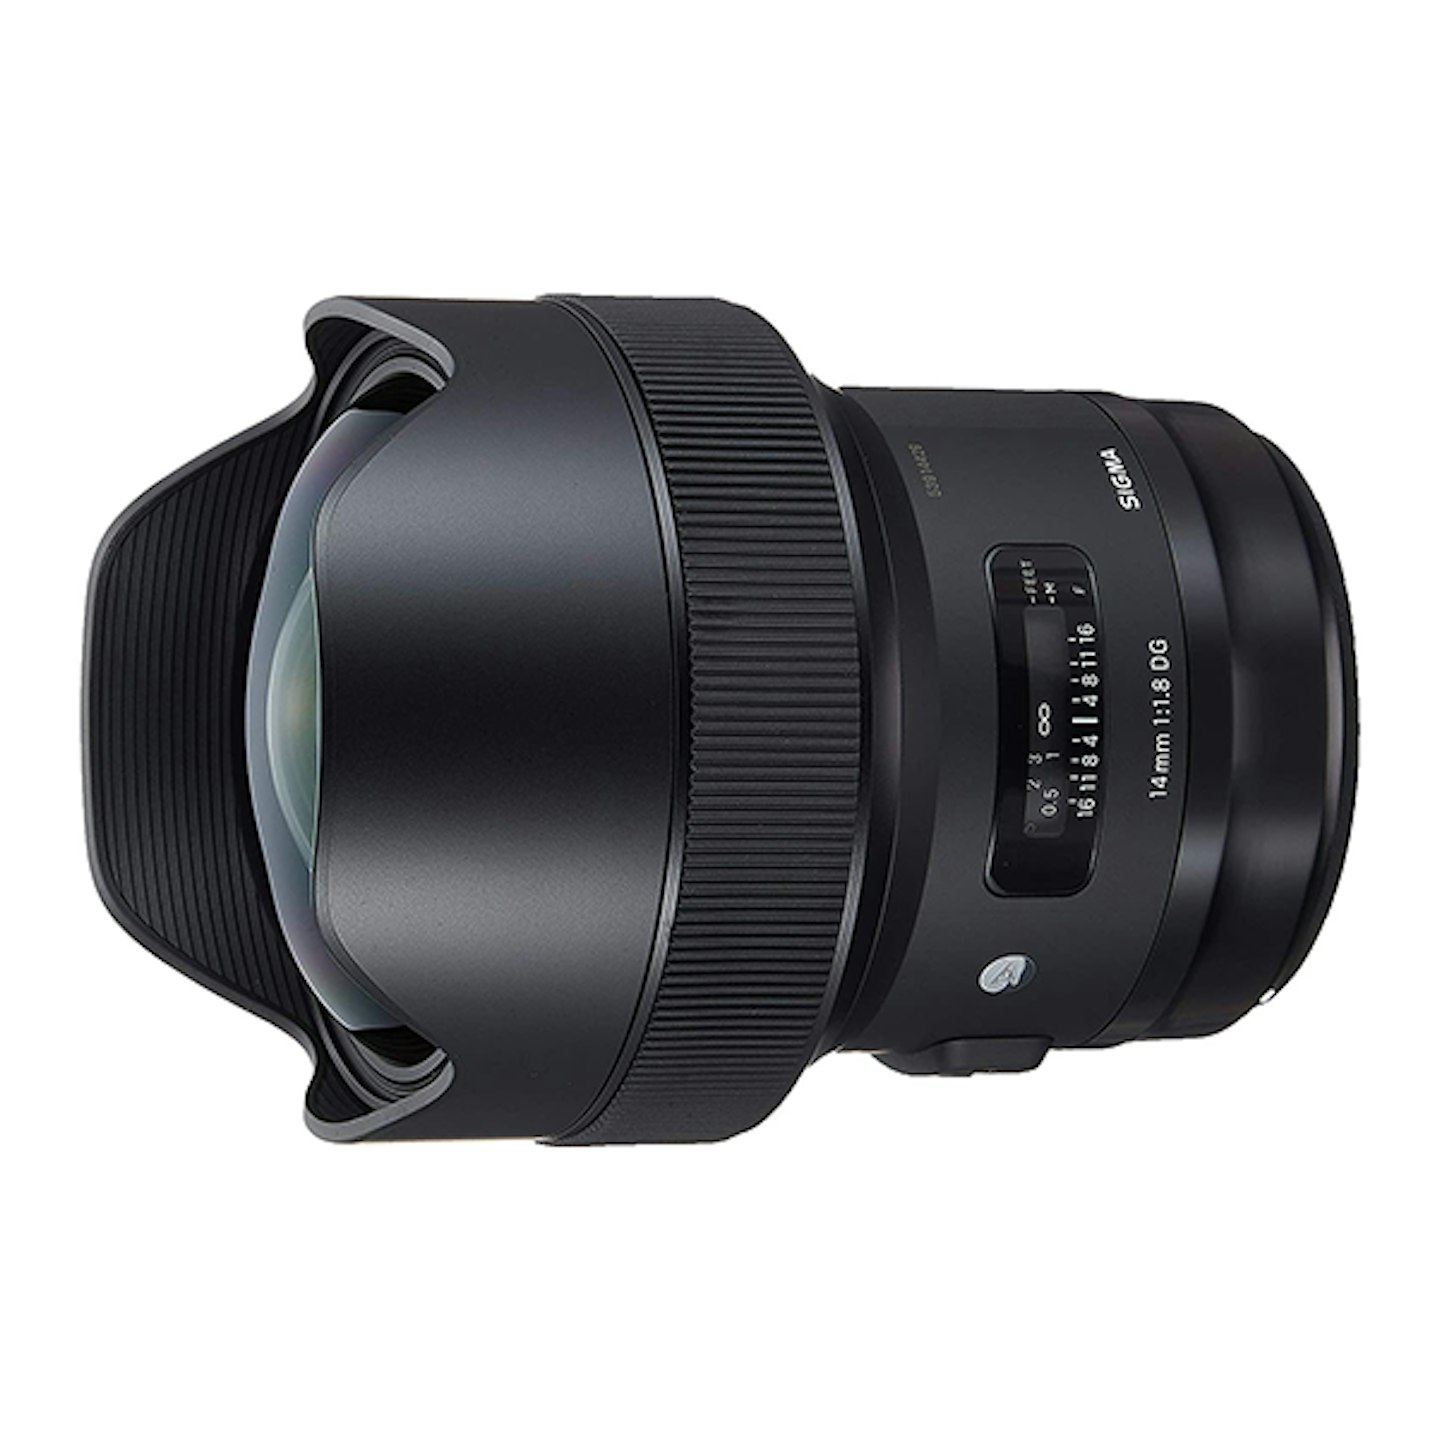 Sigma 450954 14 mm F1.8 DG HSM Lens for Canon Camera